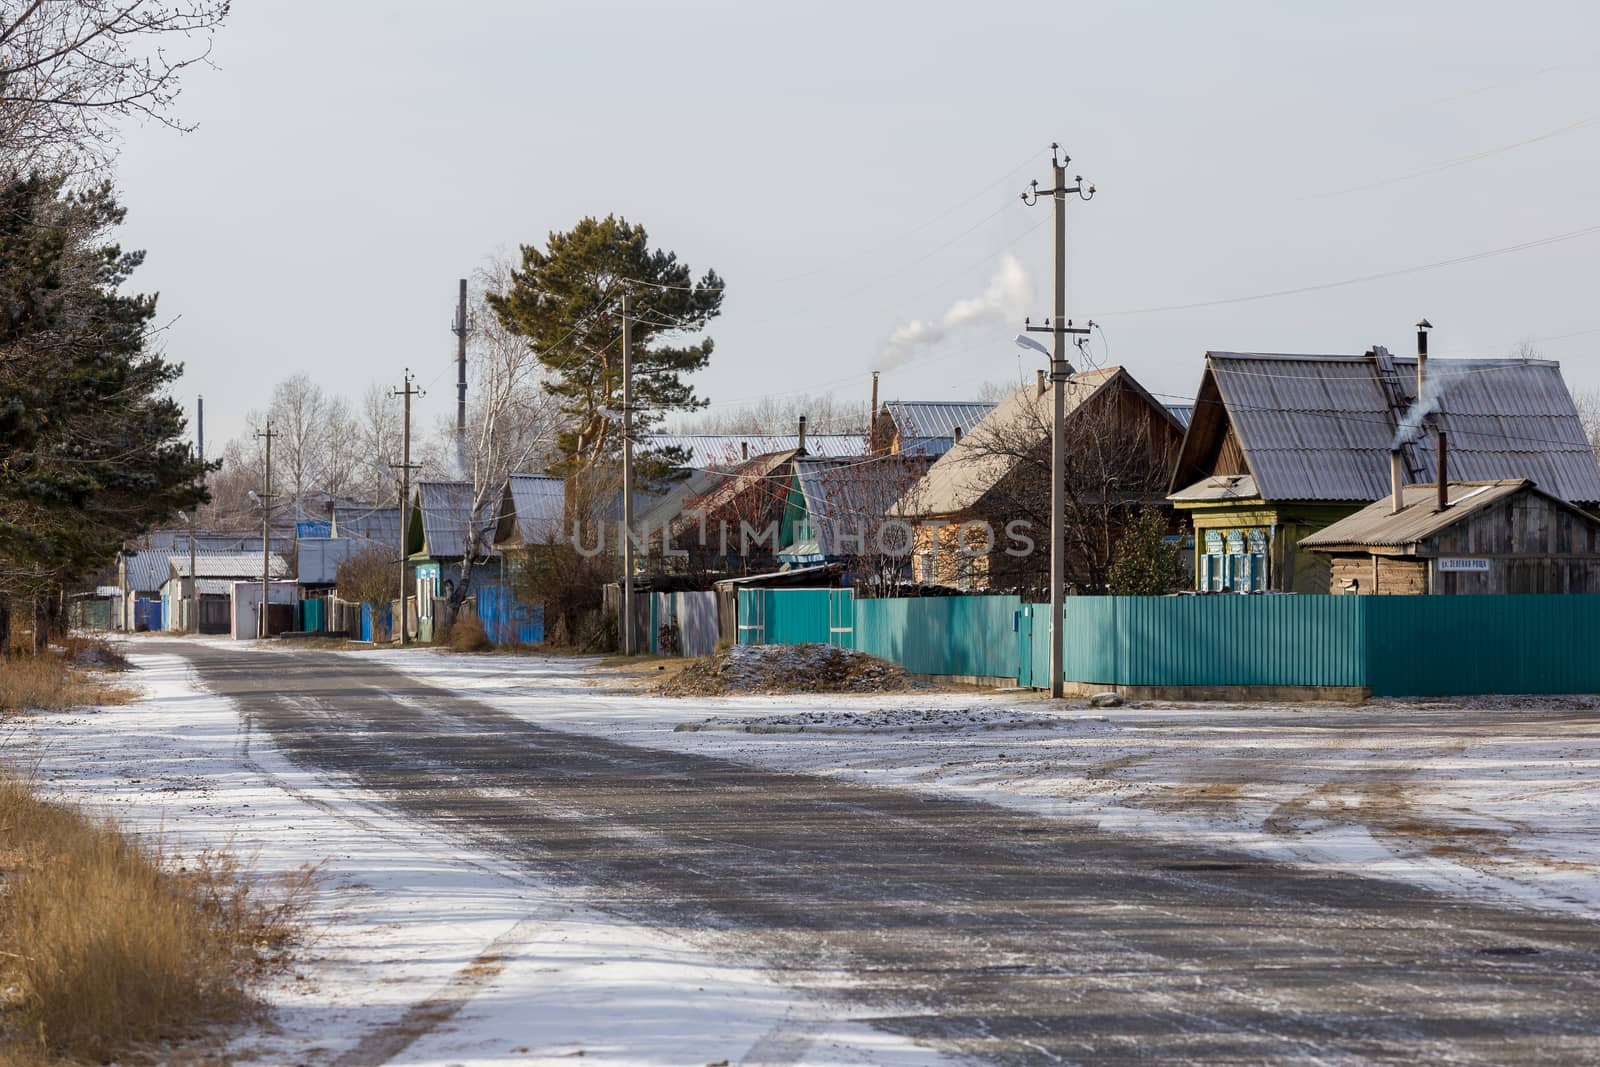 Street with wooden one-story houses in the Russian village.